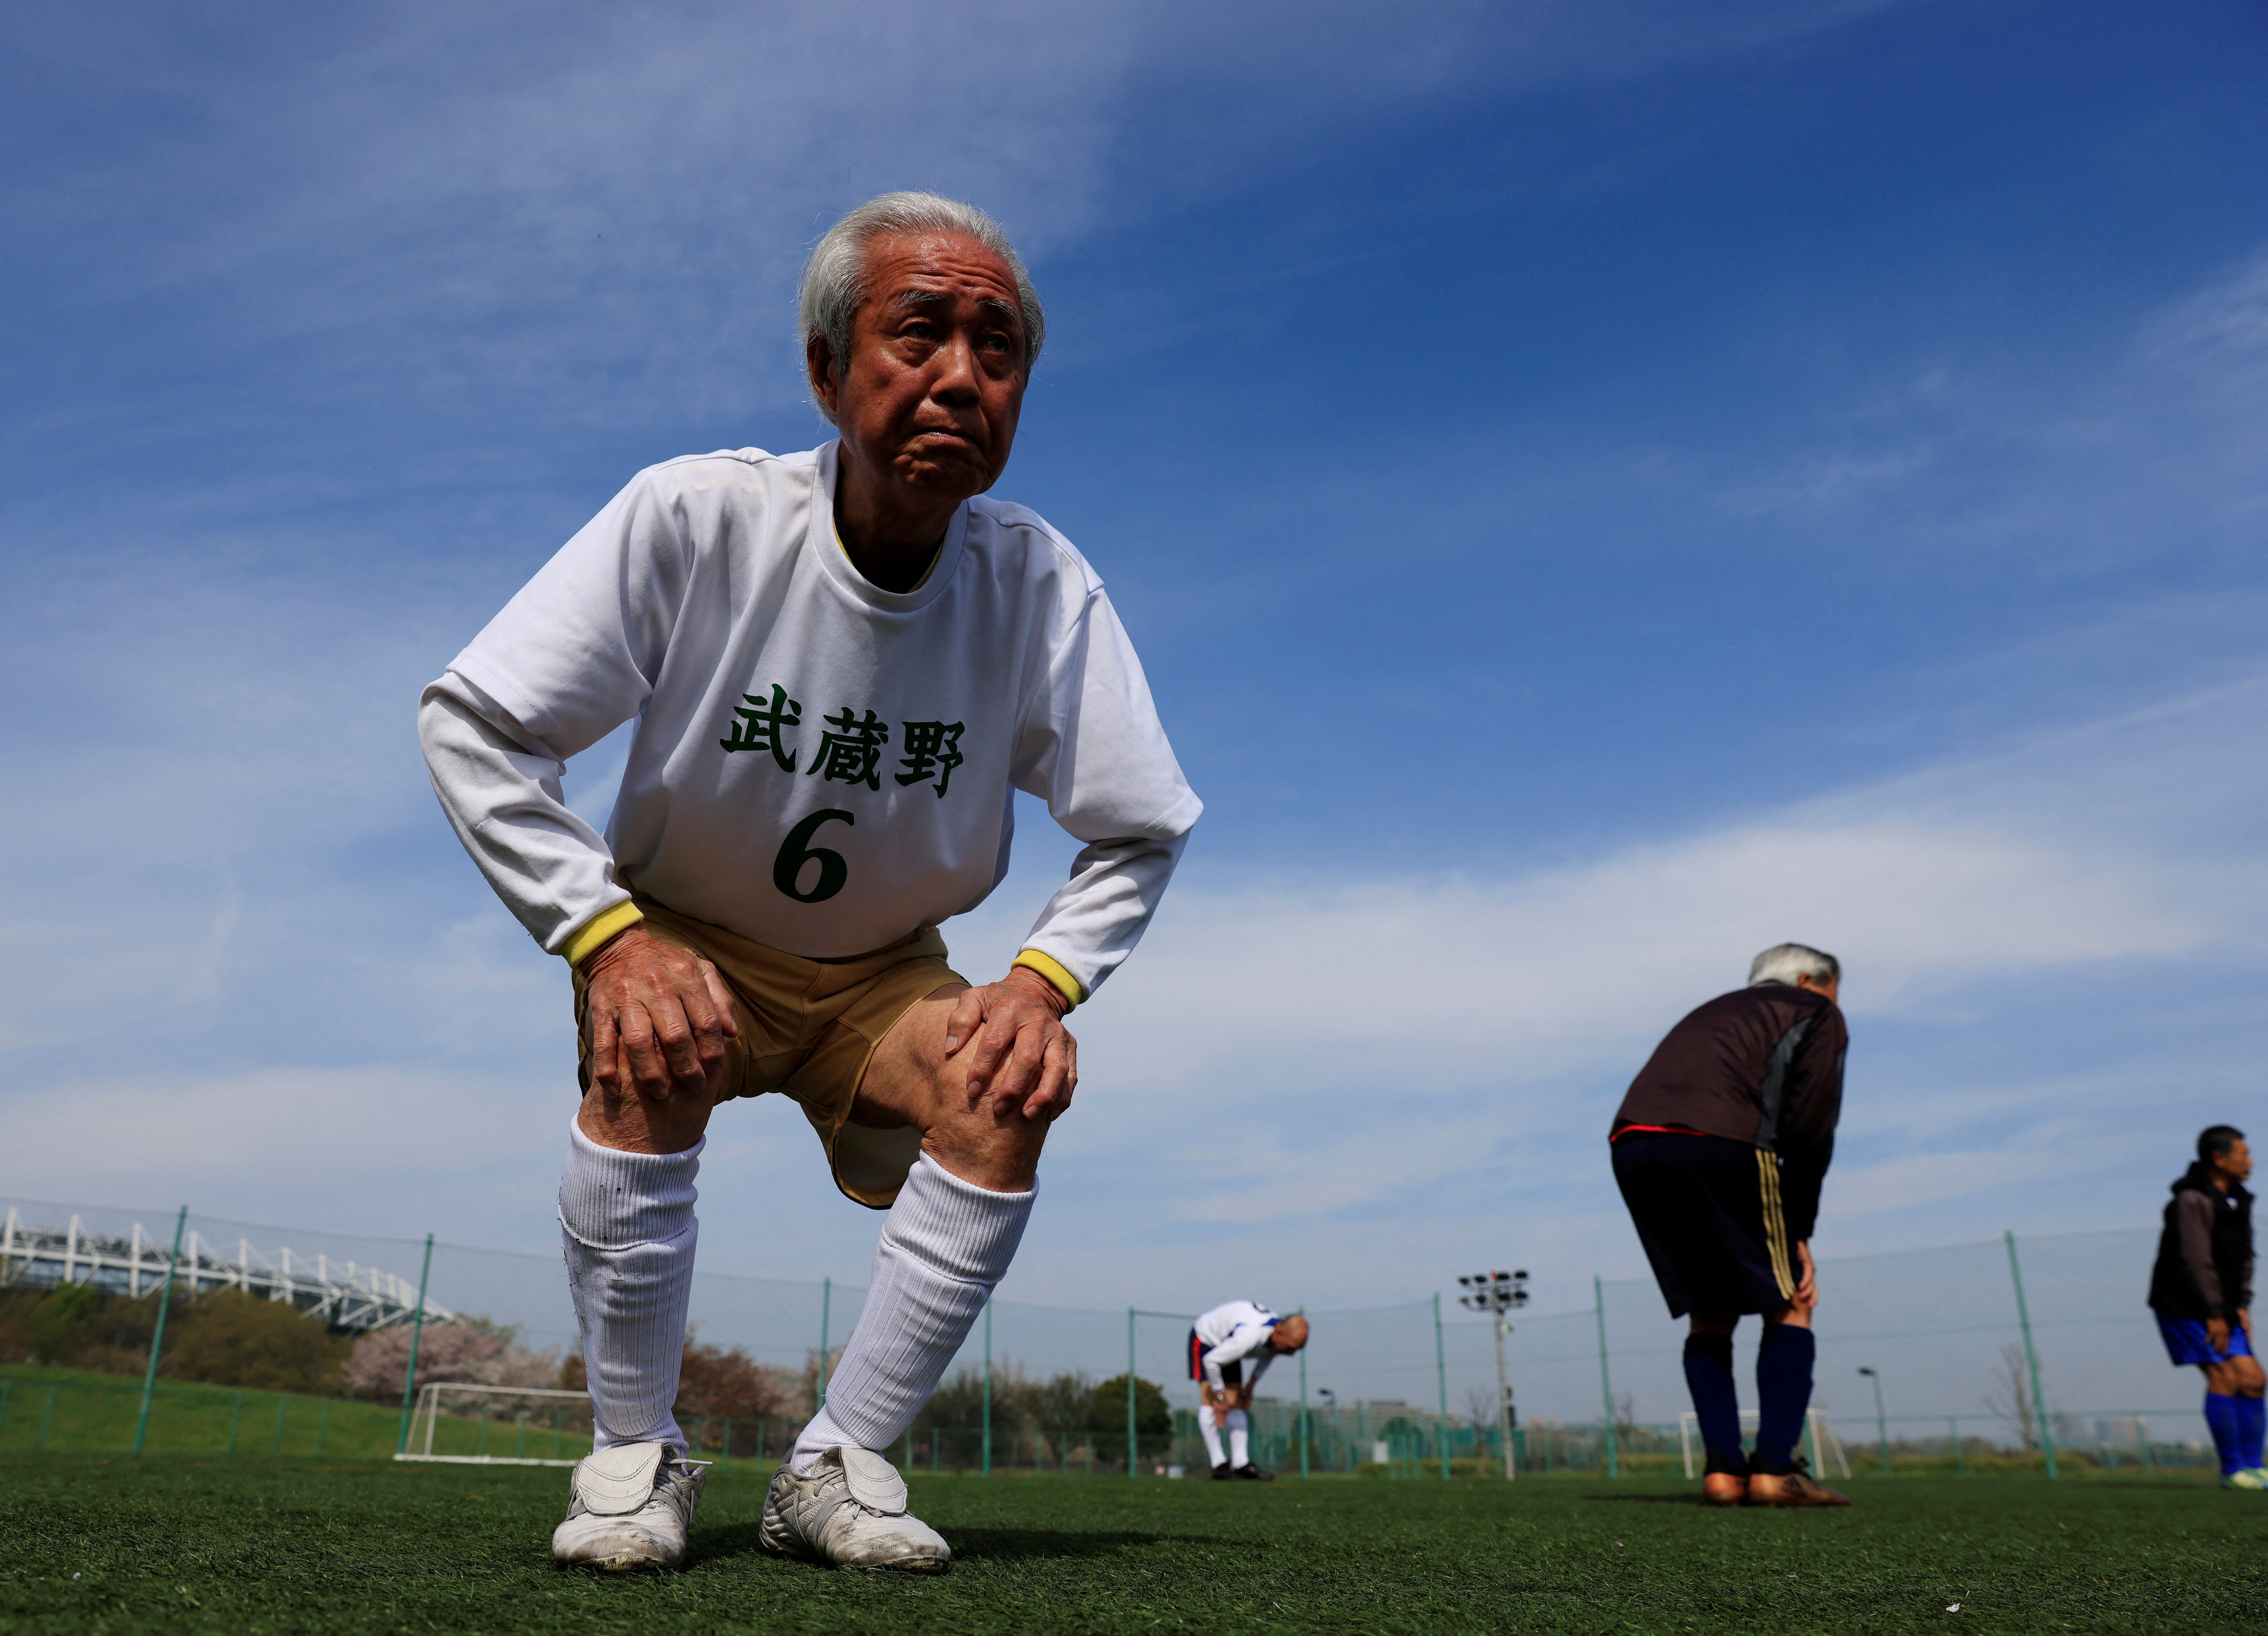 Nomura, 83, stretches during a practice with his TAFF (Tama Area Friday Football) teammates, a football team where the players’ average age is 65